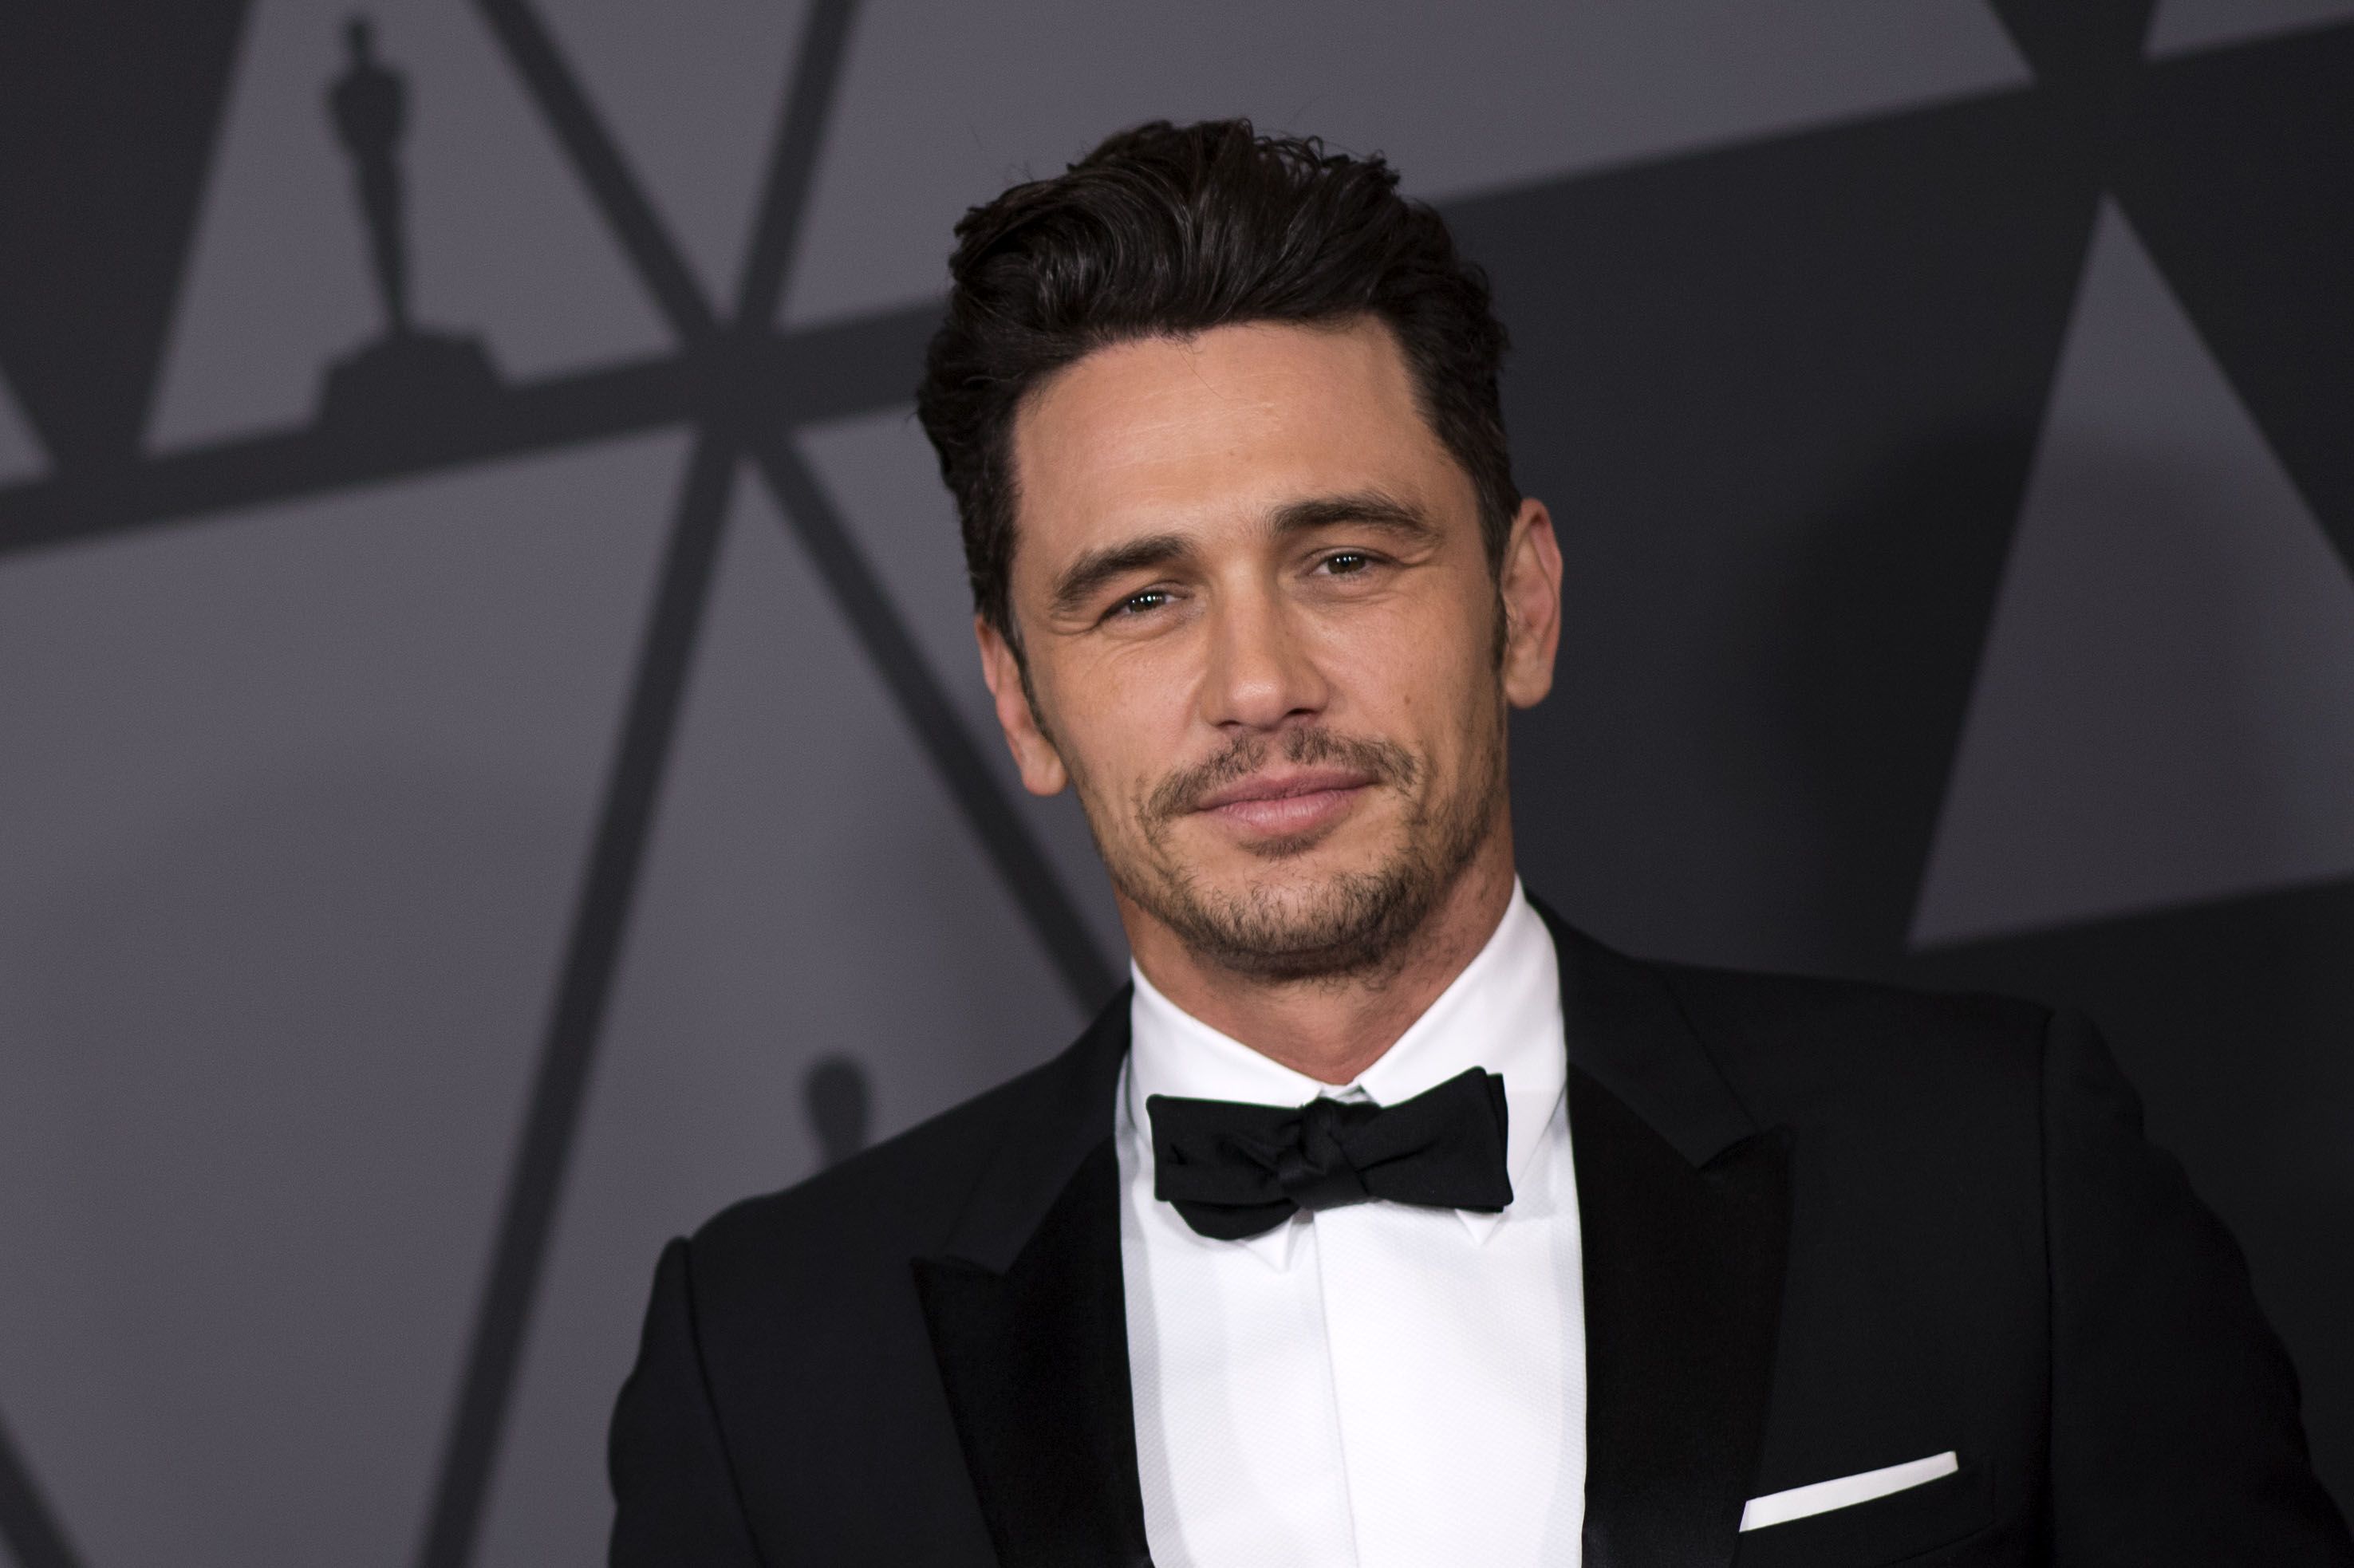 Opinion: James Franco controversy spotlights Hollywood's perpetual blind  spot